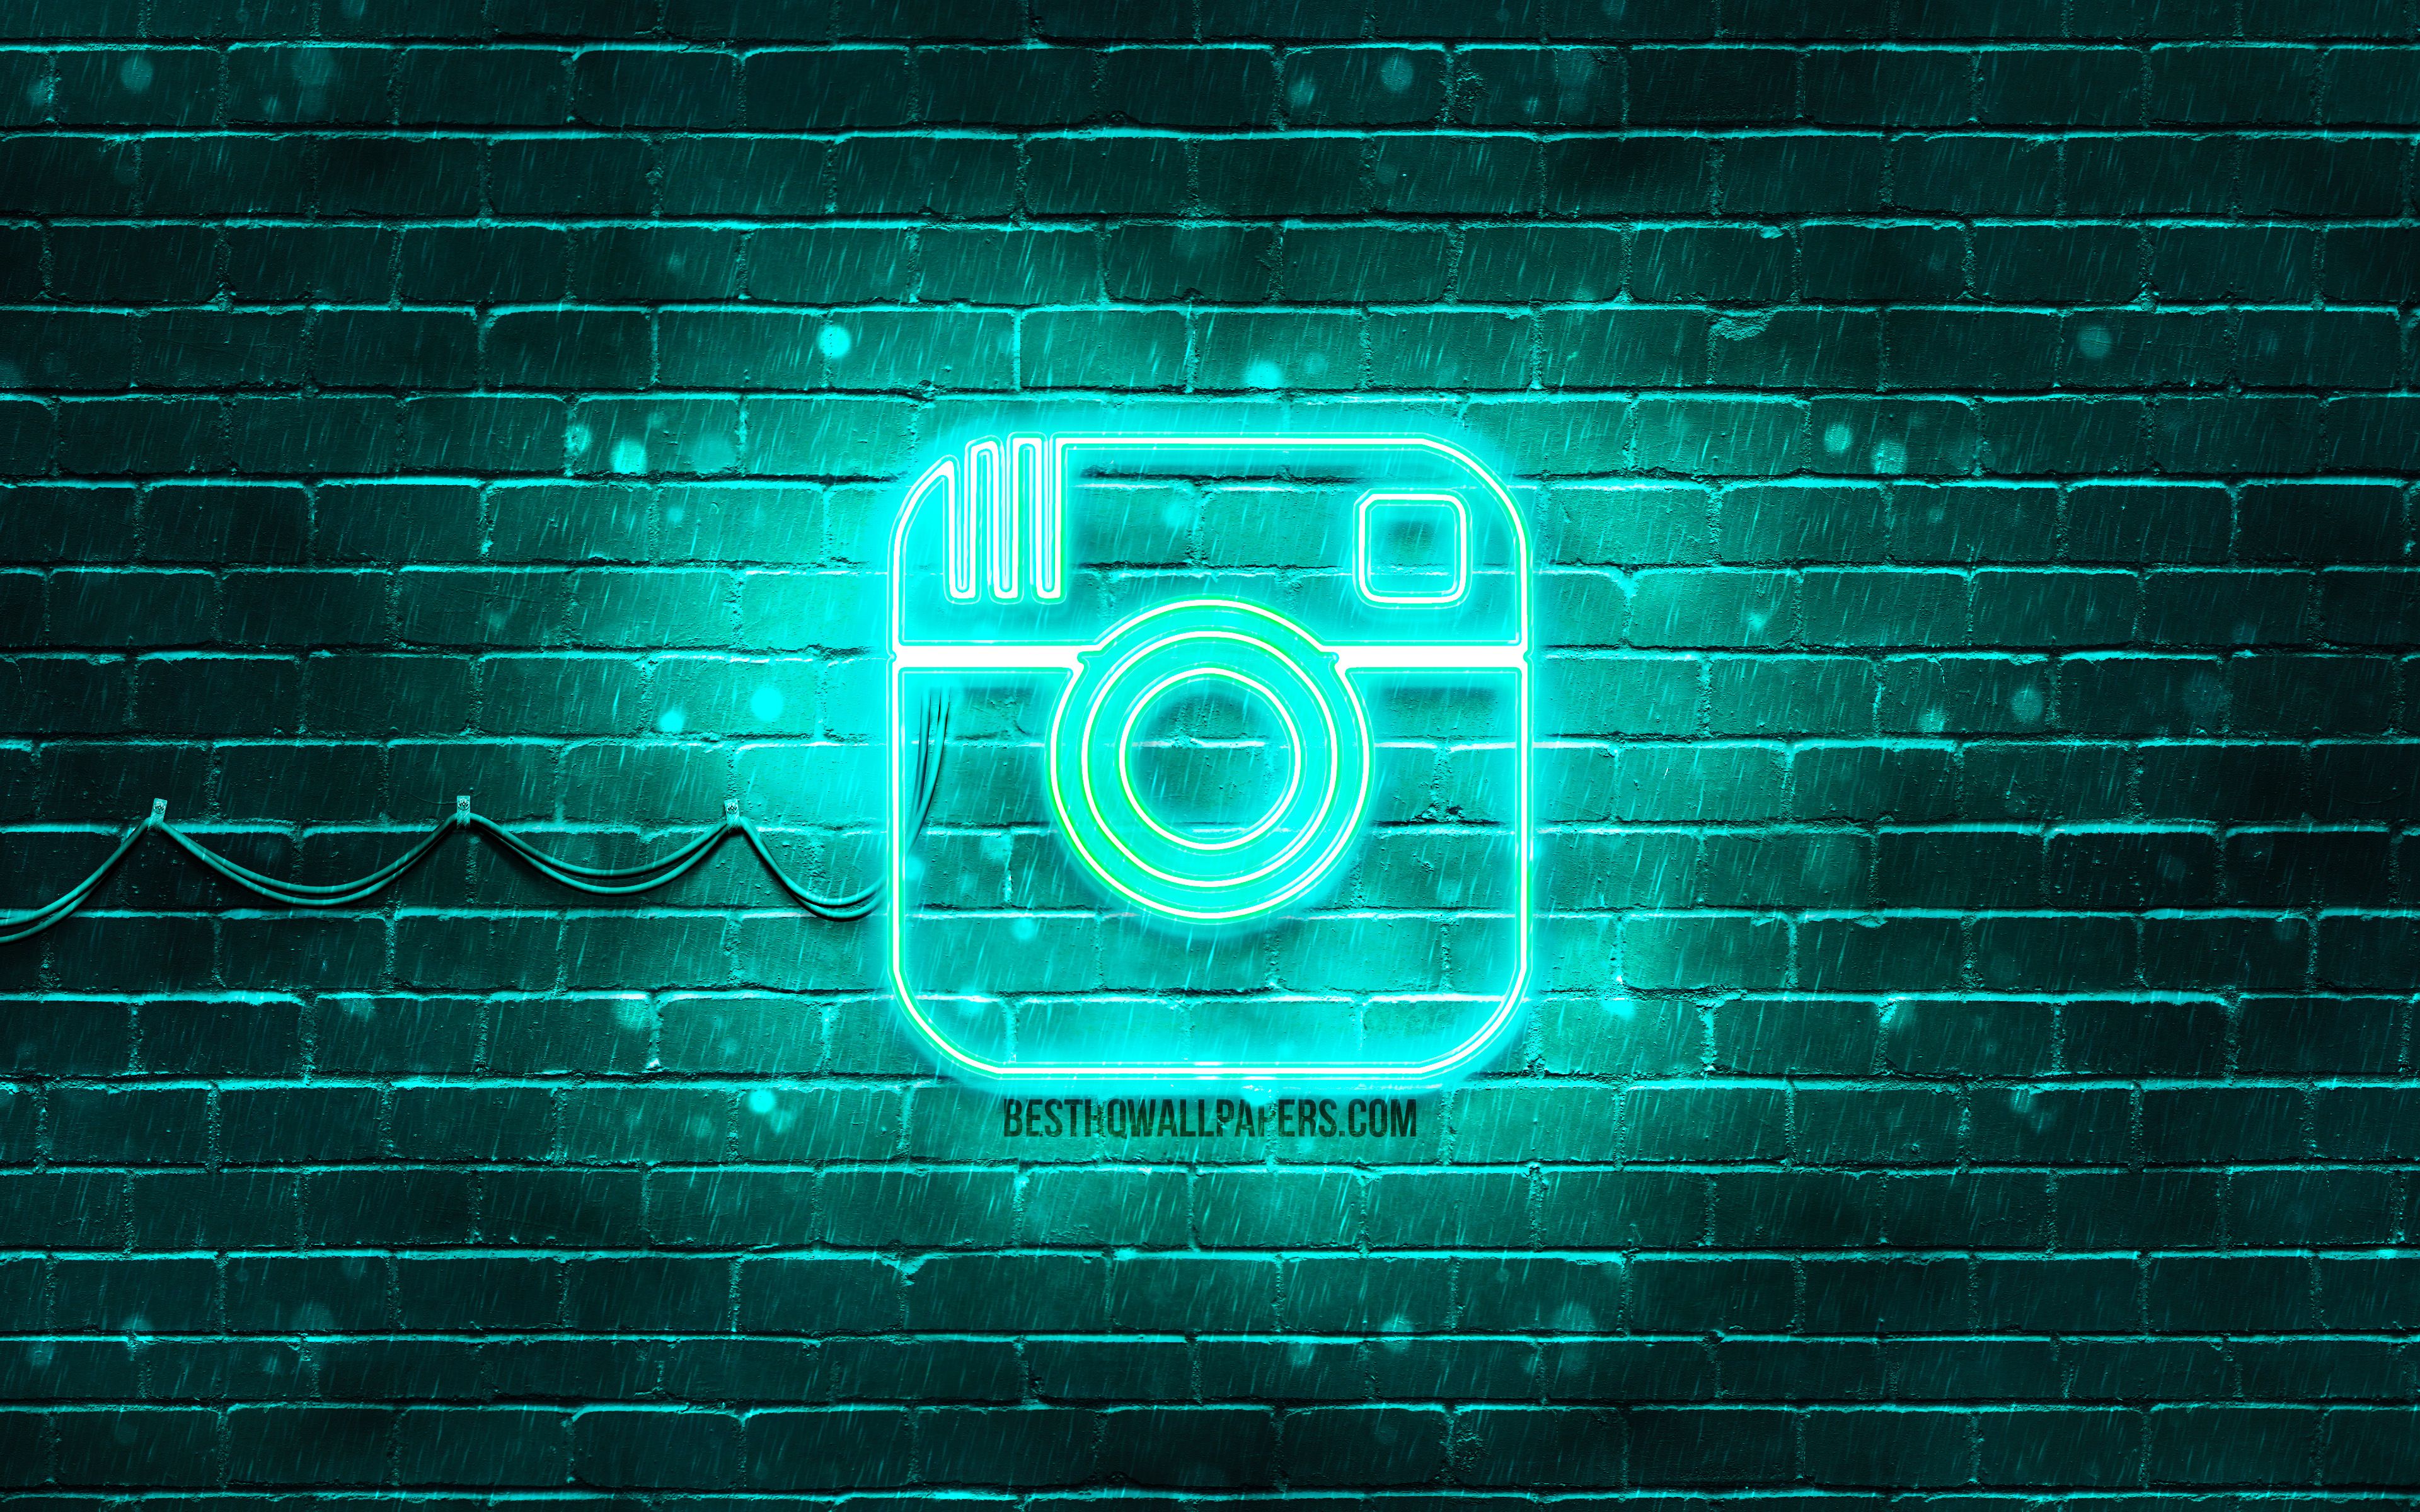 Download wallpaper Instagram turquoise logo, 4k, turquoise brickwall, Instagram logo, brands, Instagram neon logo, Instagram for desktop with resolution 3840x2400. High Quality HD picture wallpaper